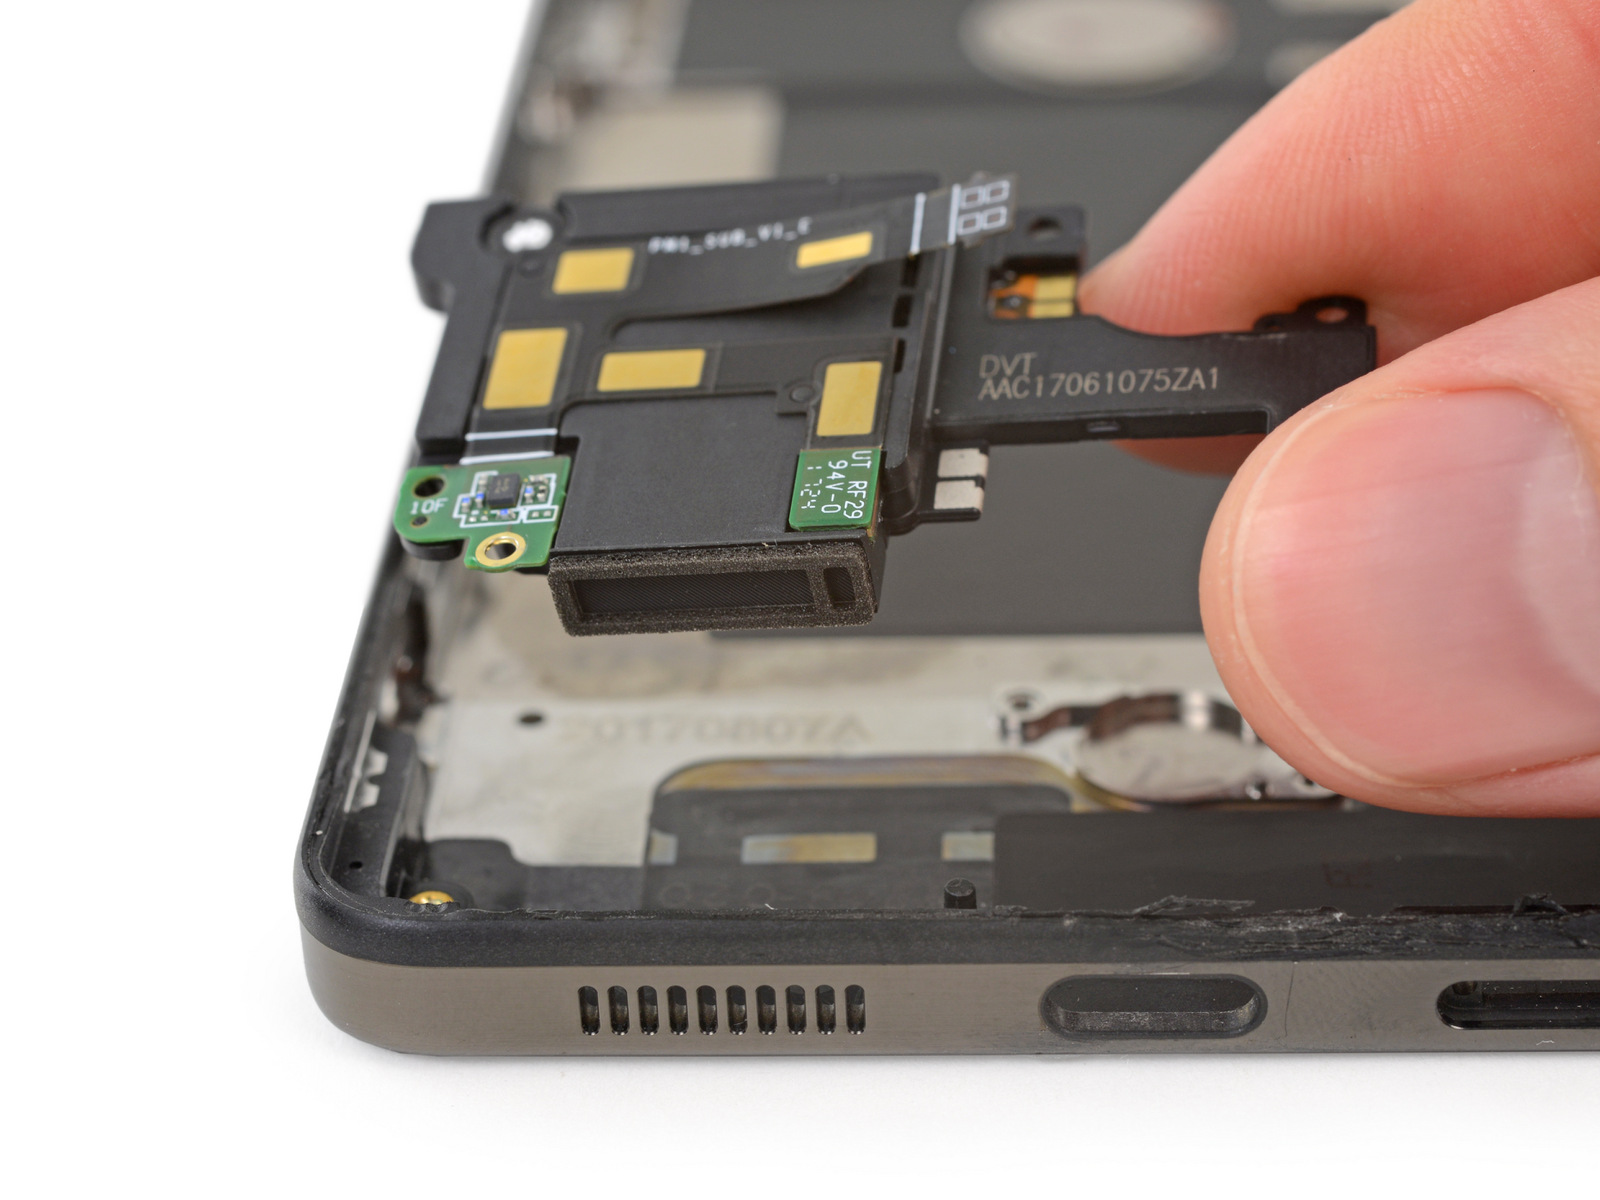 Ben_trong_Essential_Phone_iFixit_17.jpeg